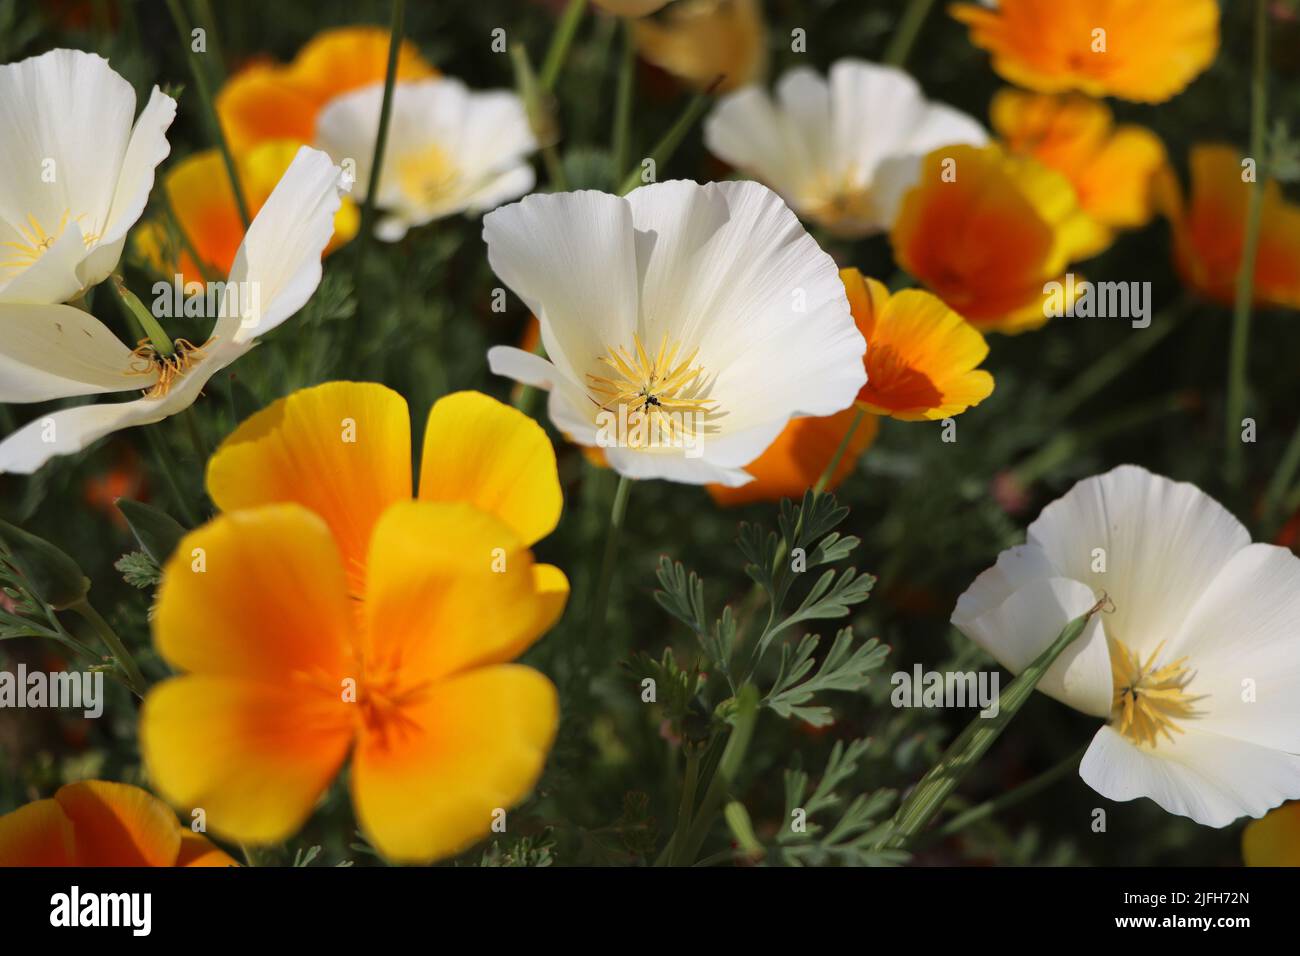 Summer background. Flowers of eschscholzia californica or californian poppy, flowering plant of family papaveraceae Stock Photo